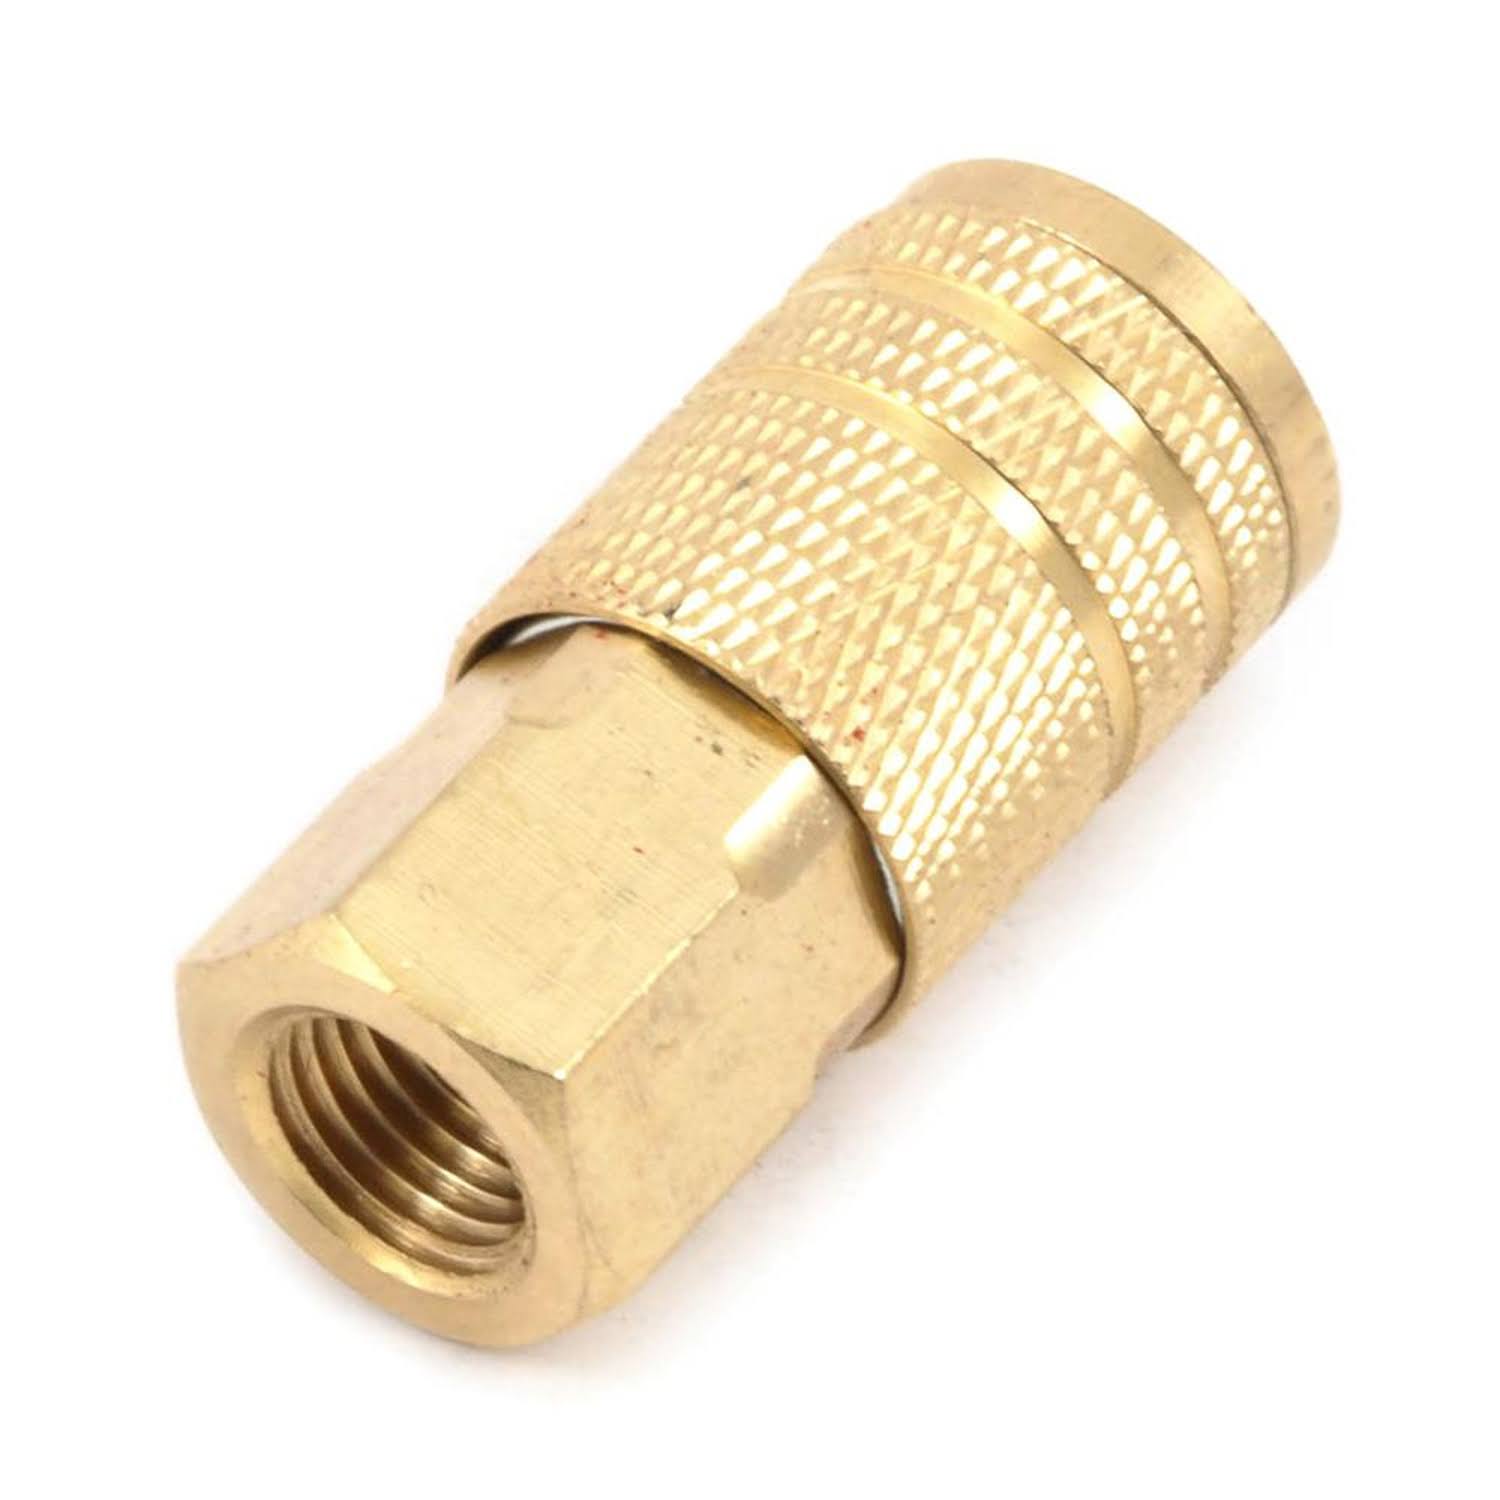 Forney 75317 Air Fitting Coupler - Industrial Milton Style, 1/4" x 1/4"